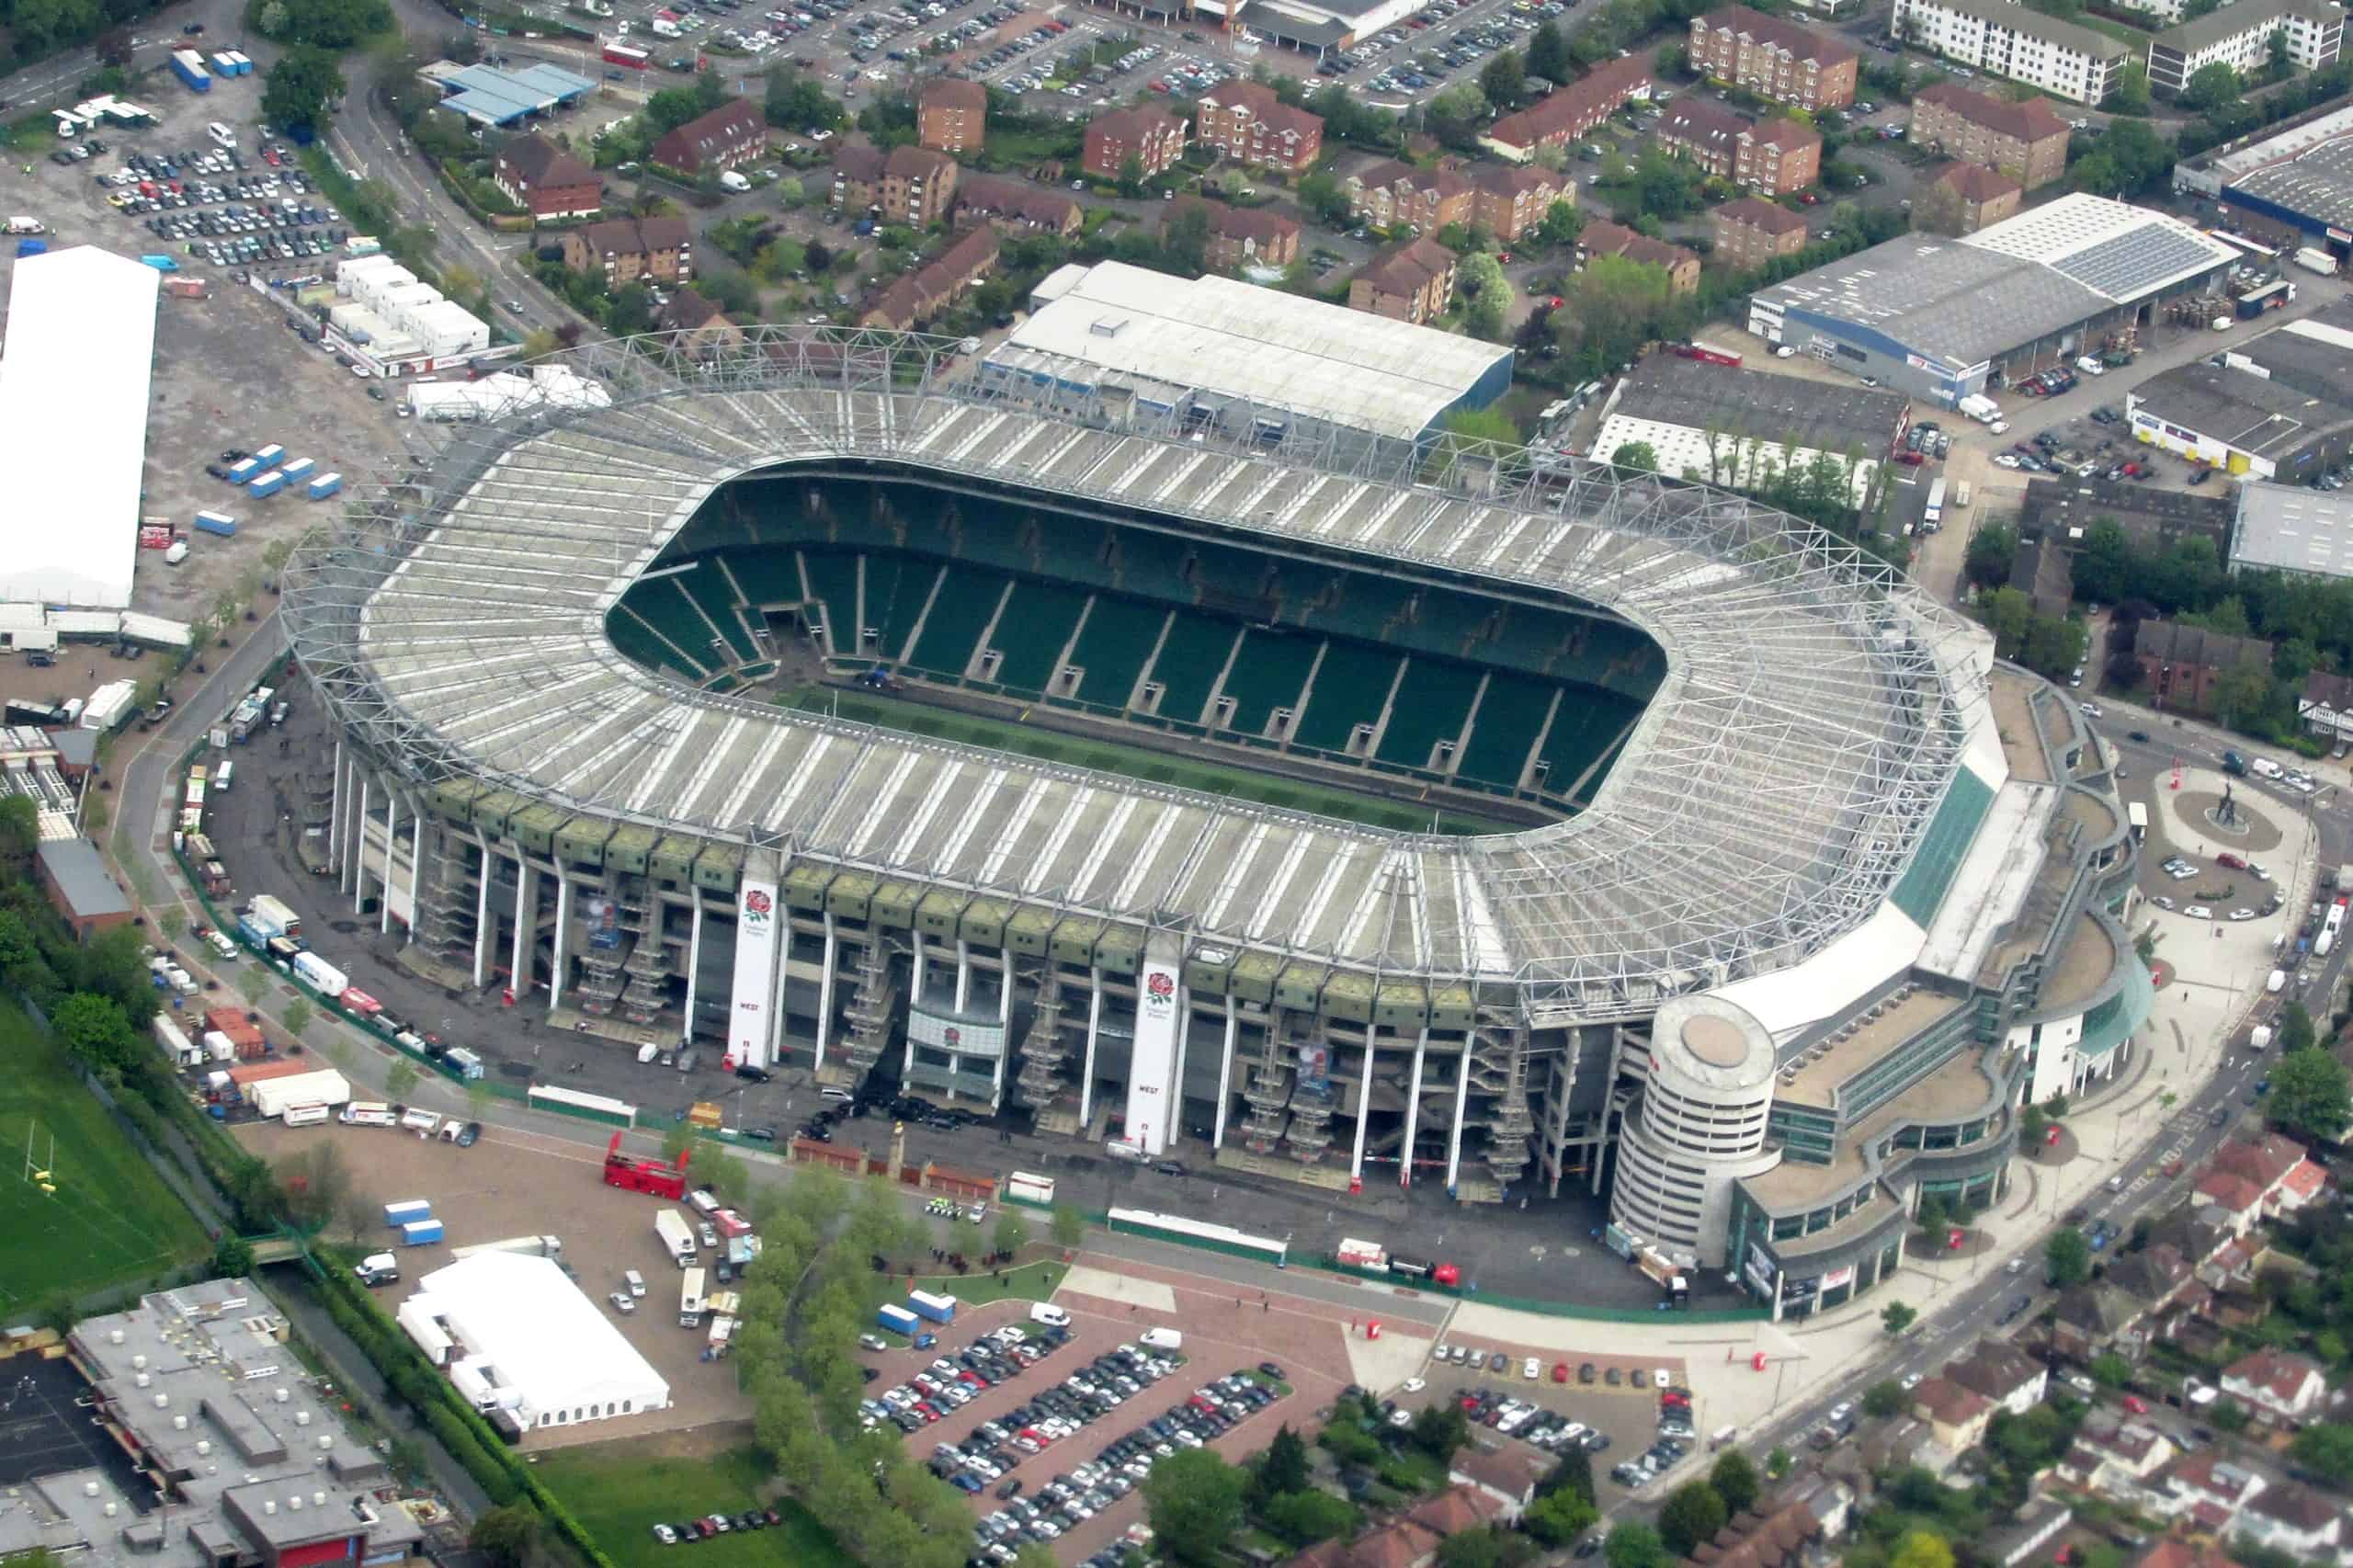 <p><strong>Year Construction Began:</strong> 1908</p>    <p><strong>Construction Completion:</strong> 1909</p>    <p>Twickenham Stadium has a seating capacity of 82,000 and is in Southwest London, England, an area that is bright and culturally vibrant with a variety of entertainment choices and facilities. </p><p>Remember to scroll up and hit the ‘Follow’ button to keep up with the newest stories from Seattle Travel on your Microsoft Start feed or MSN homepage!</p>